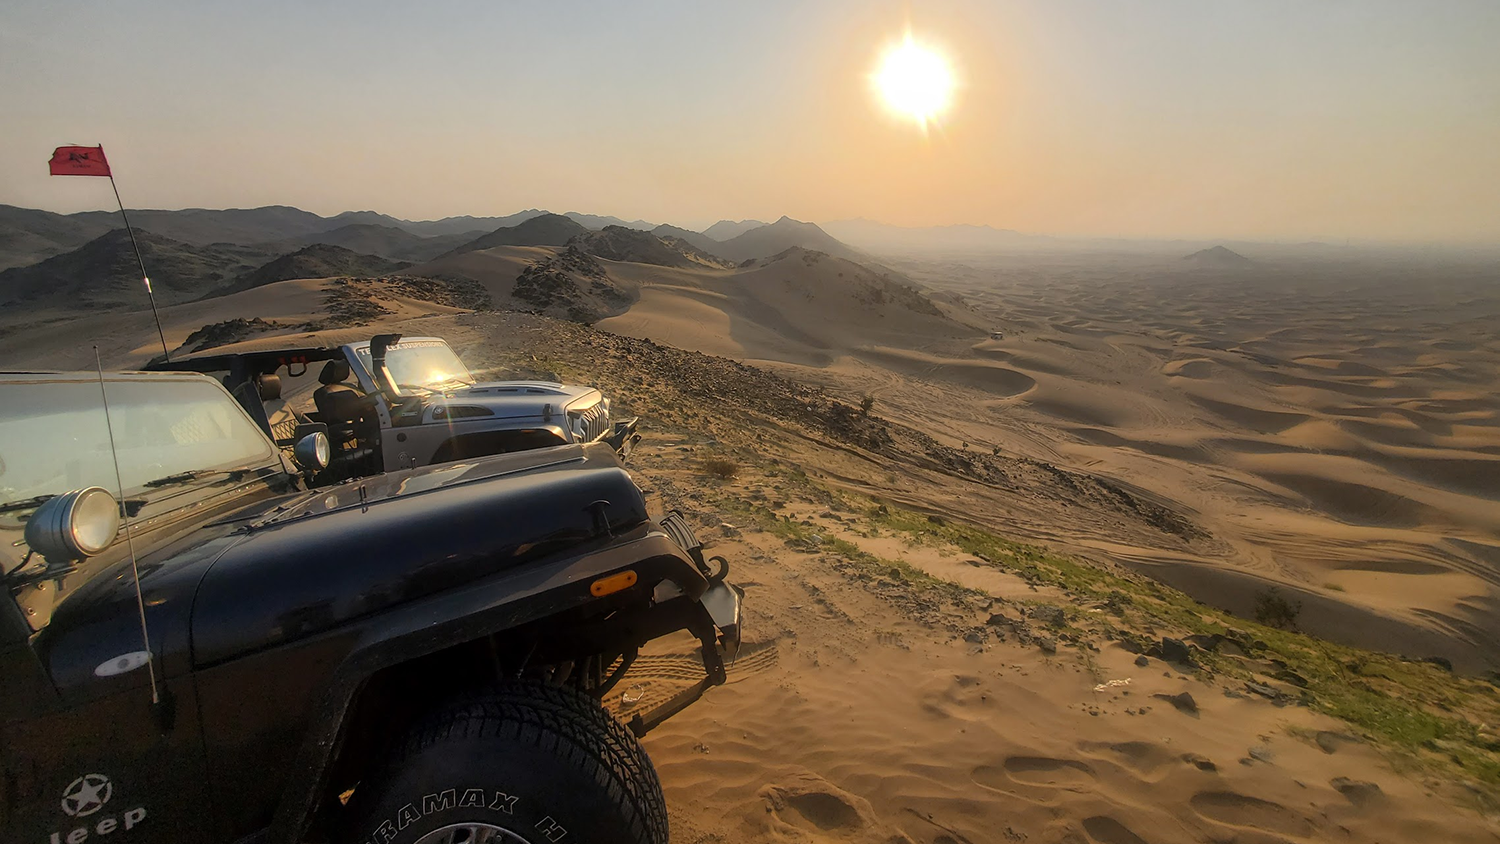 Two Jeeps, left, sit atop a sand dune ridge facing the sunset in the distance.